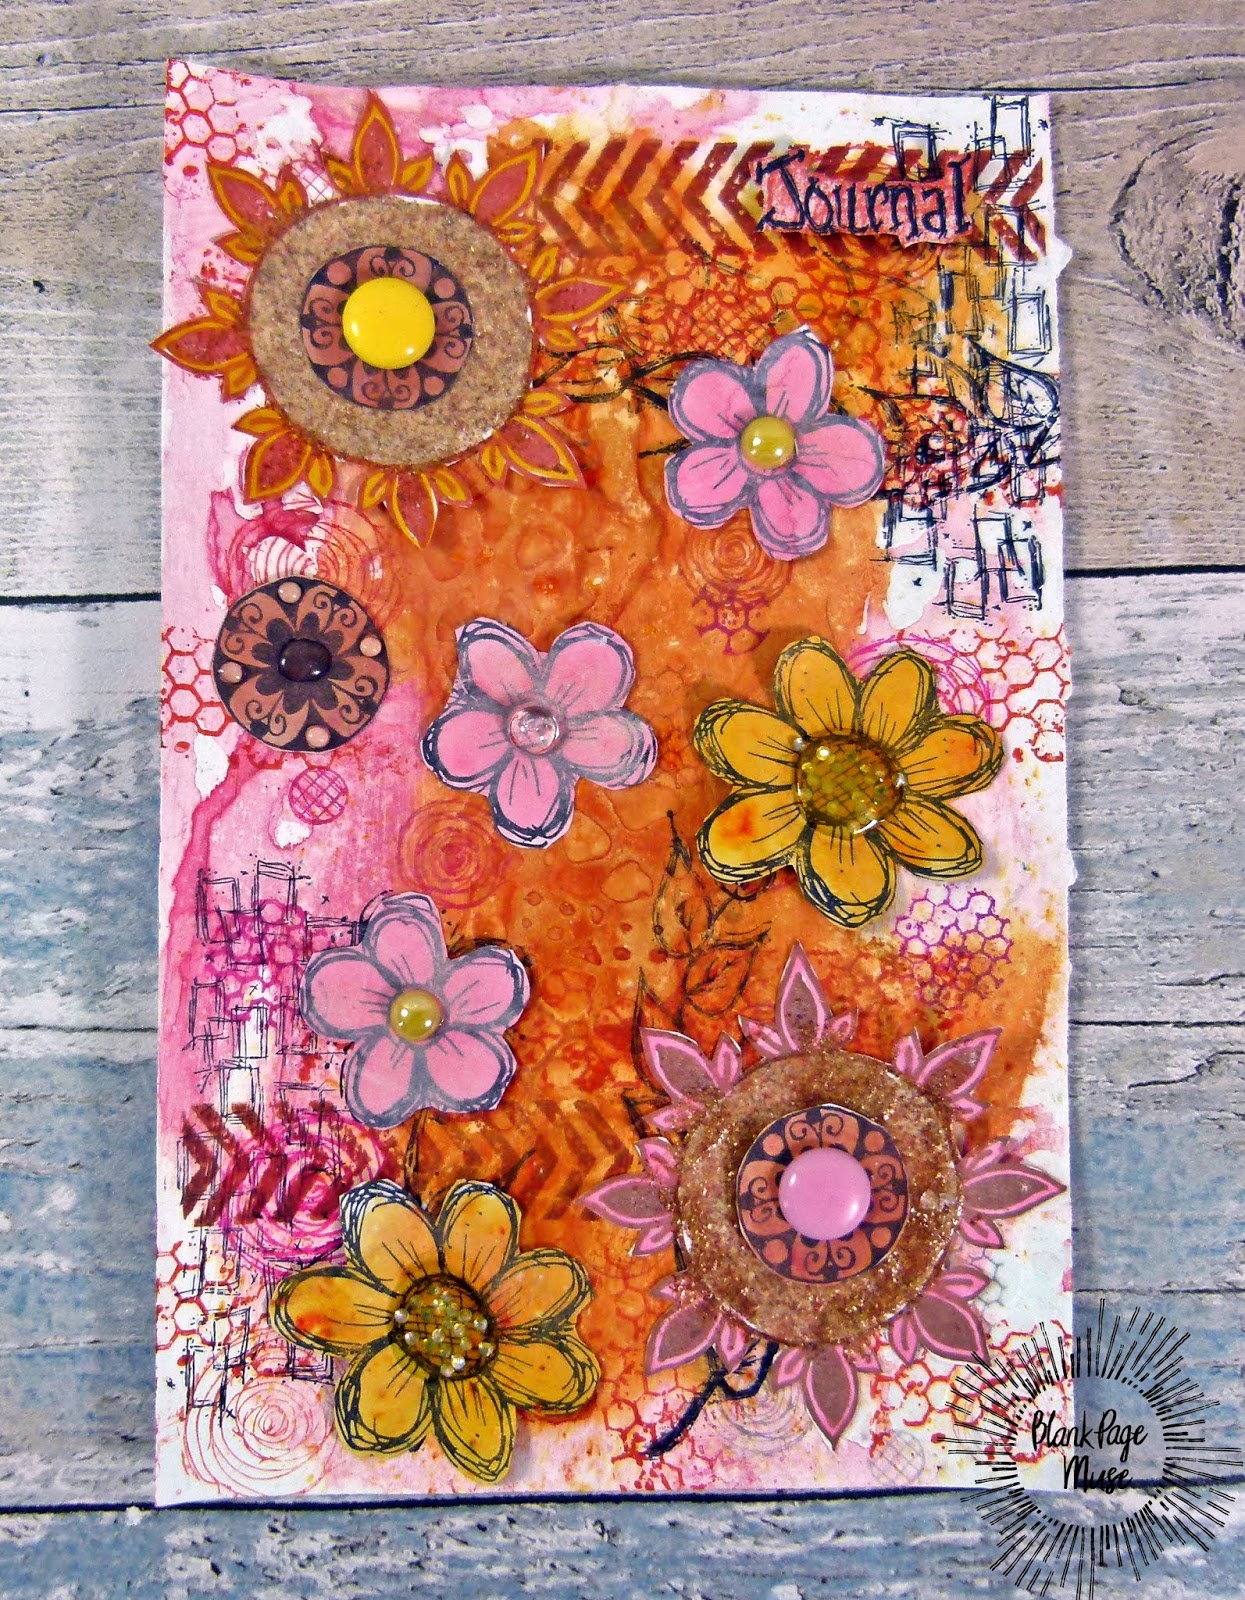 The Blank Page Muse Flowers Mixed Media Art Journal | Life in a Snapshot